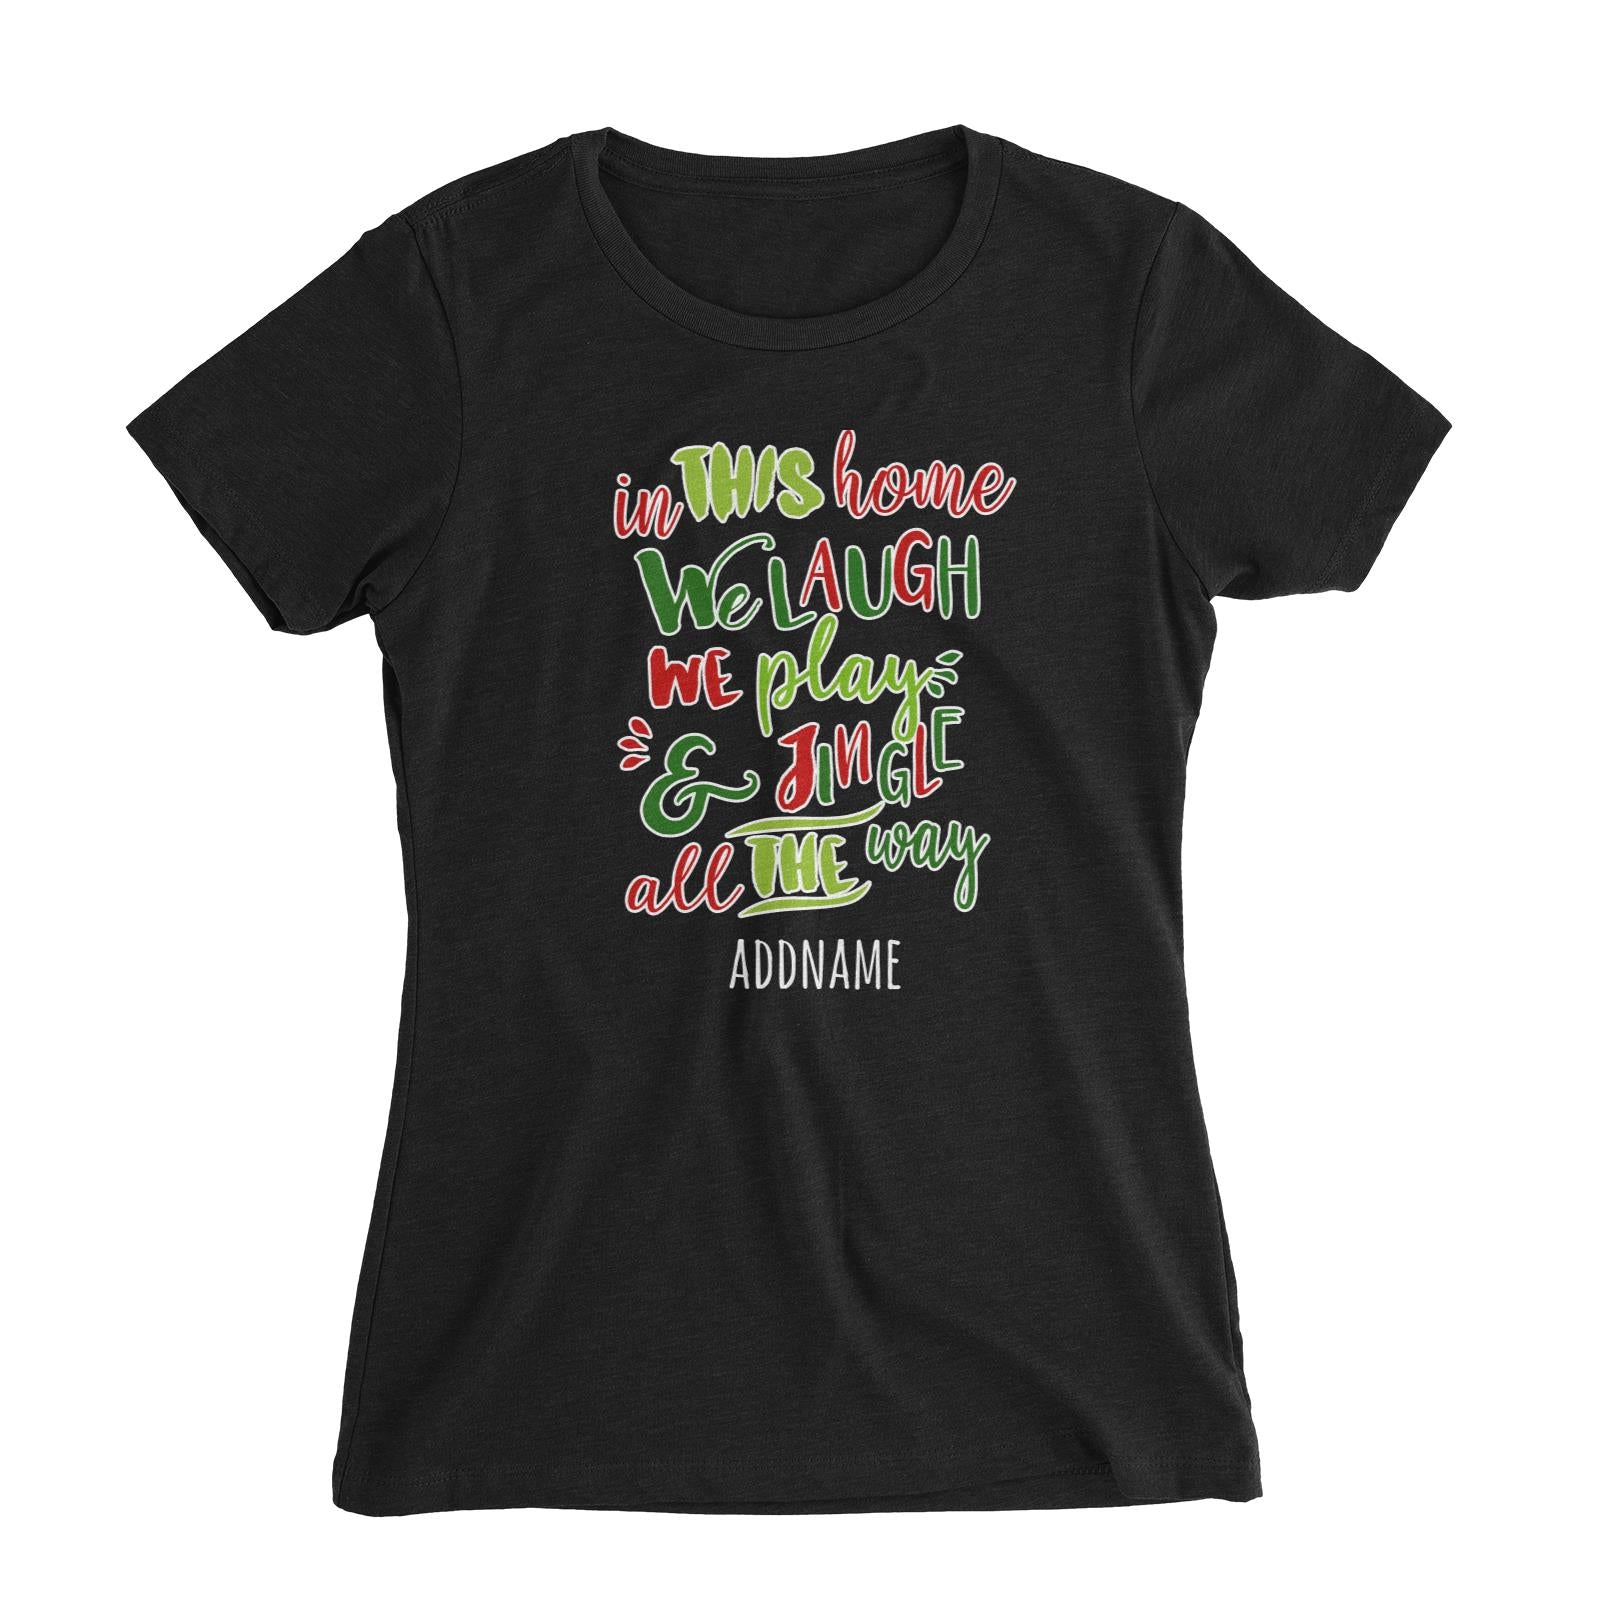 In This Home We Laugh, We Play & Jingle All The Way Lettering Addname Women's Slim Fit T-Shirt Christmas Matching Family Personalizable